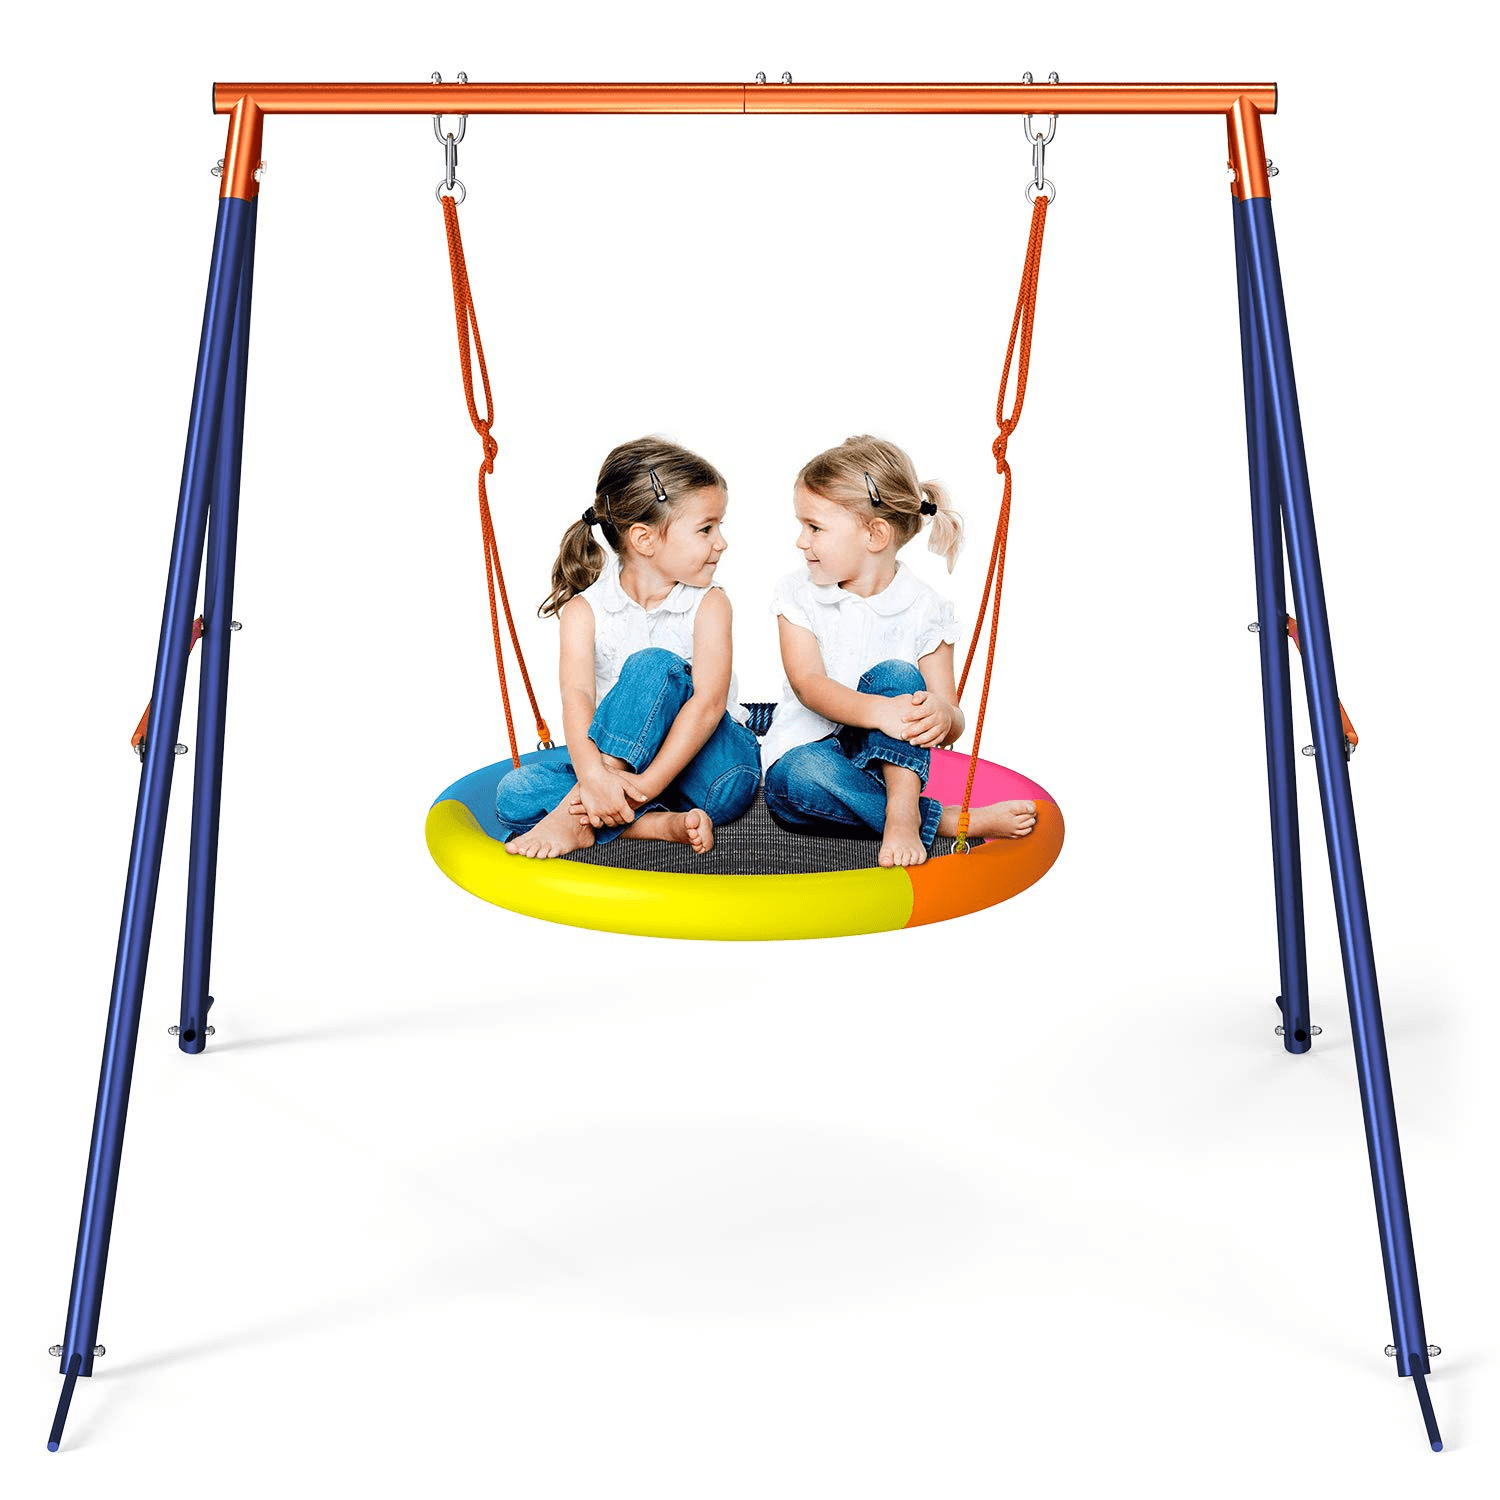 40" Large Kids Saucer Tree Swing Details about   Heavy Duty Premium Porch Swing Frame Set 